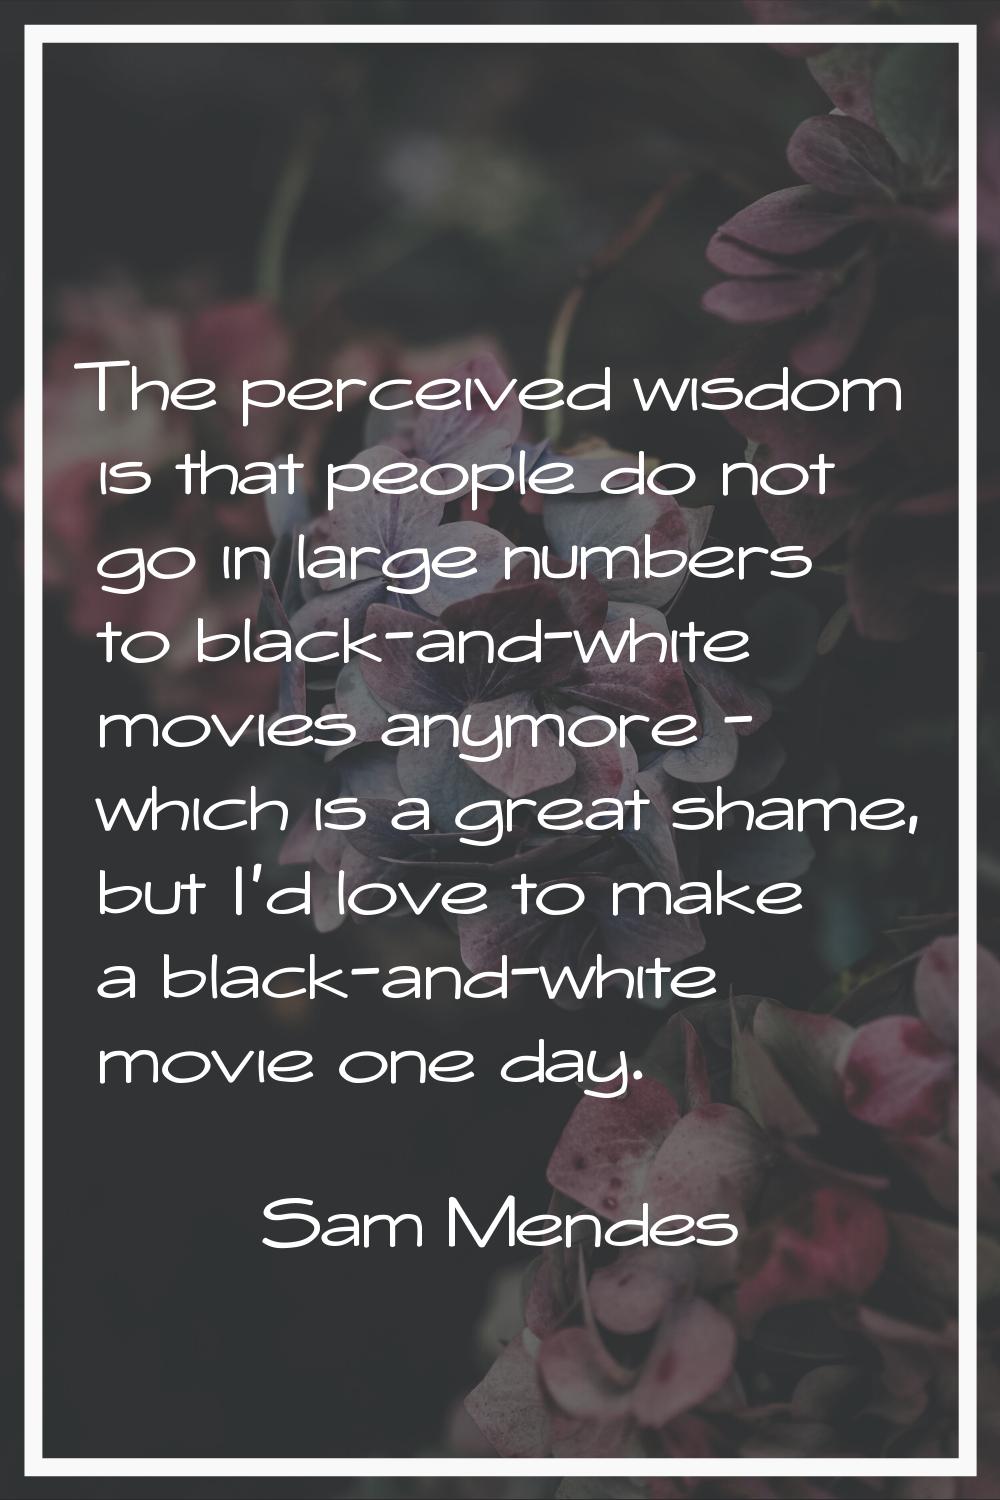 The perceived wisdom is that people do not go in large numbers to black-and-white movies anymore - 